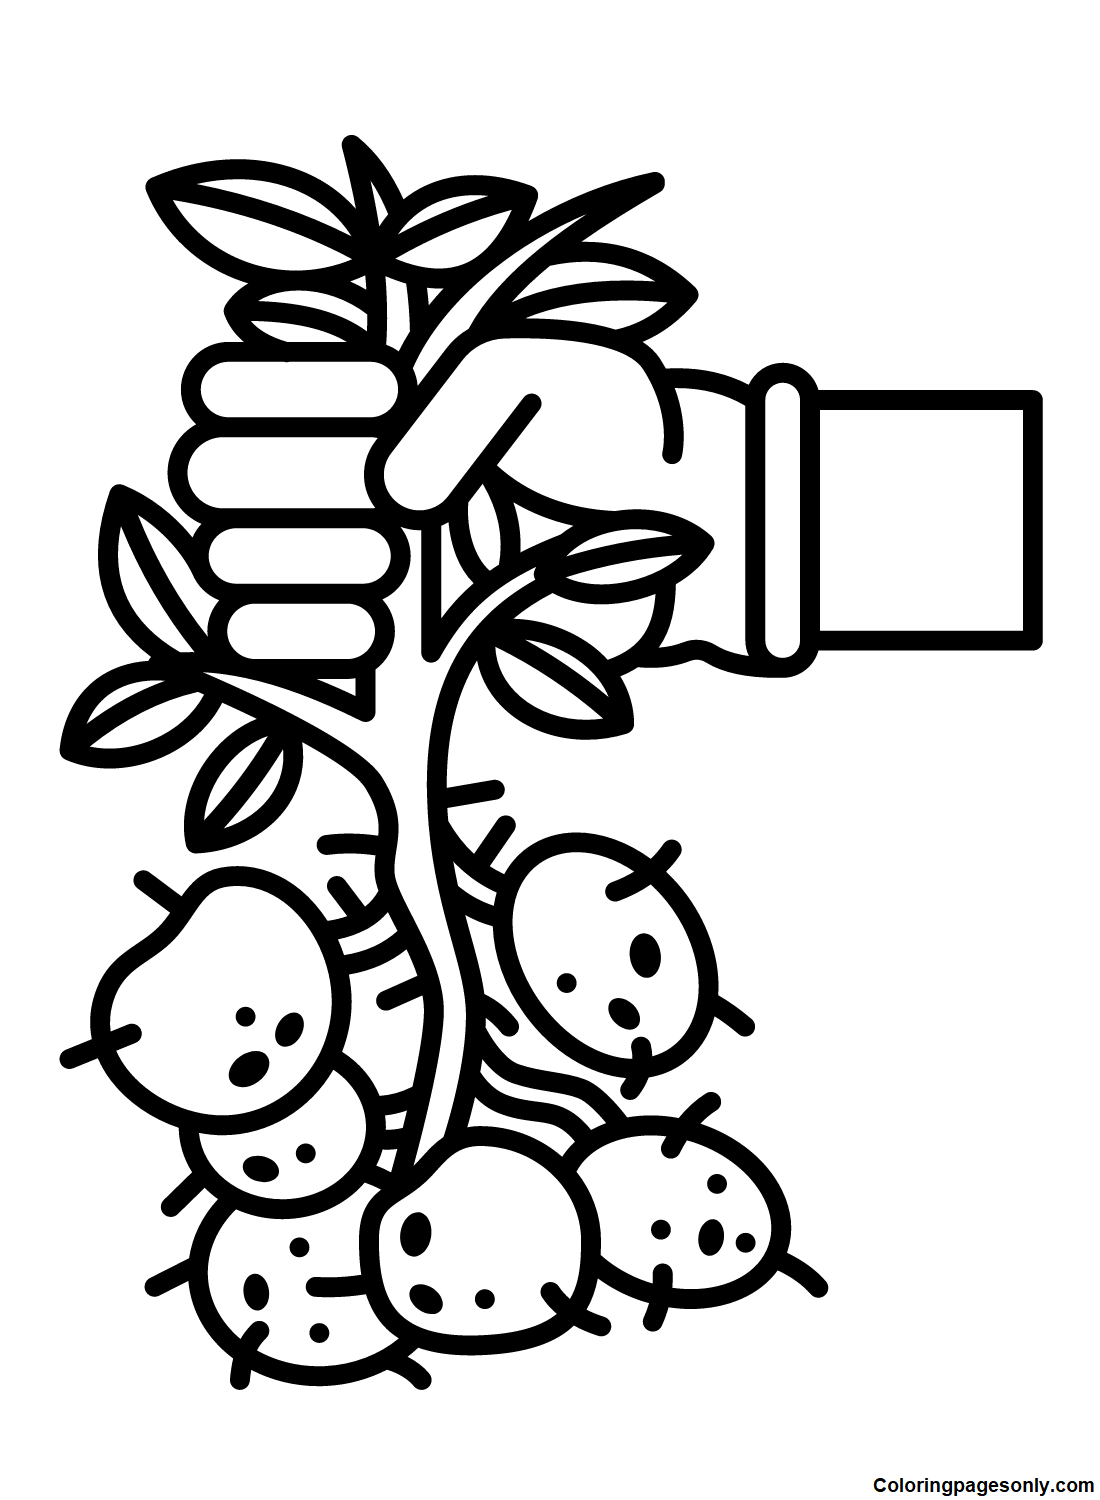 Harvest Garden Potatoes Coloring Pages